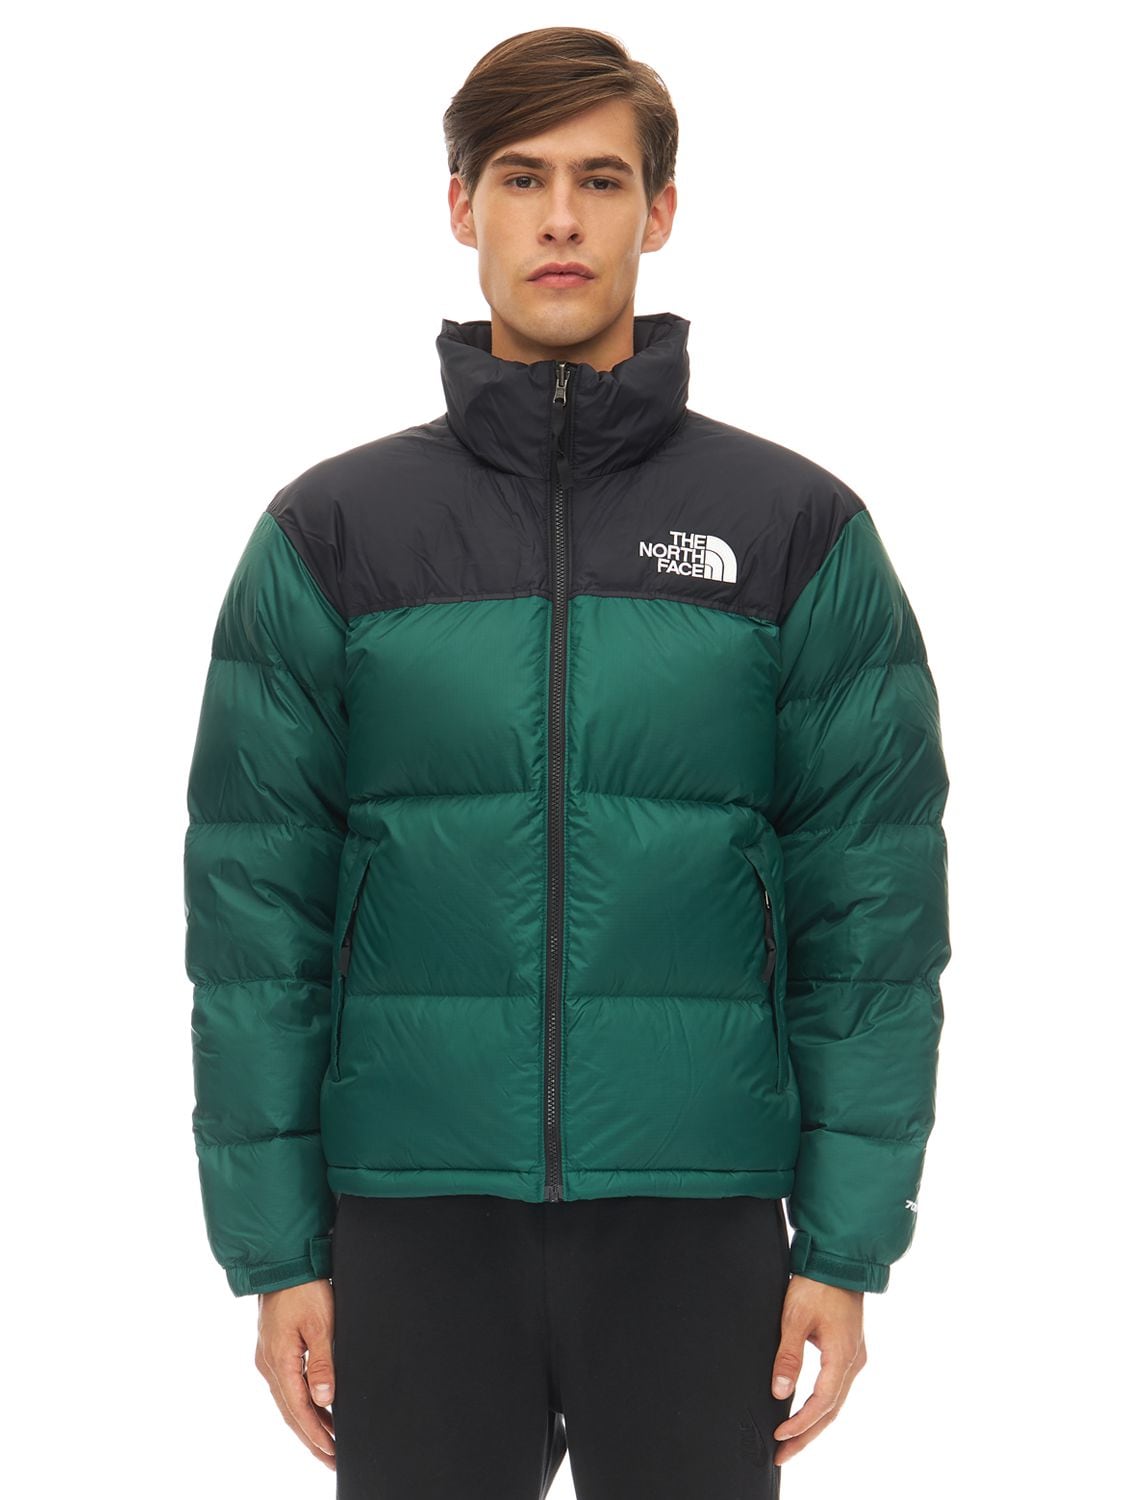 forest green north face jacket